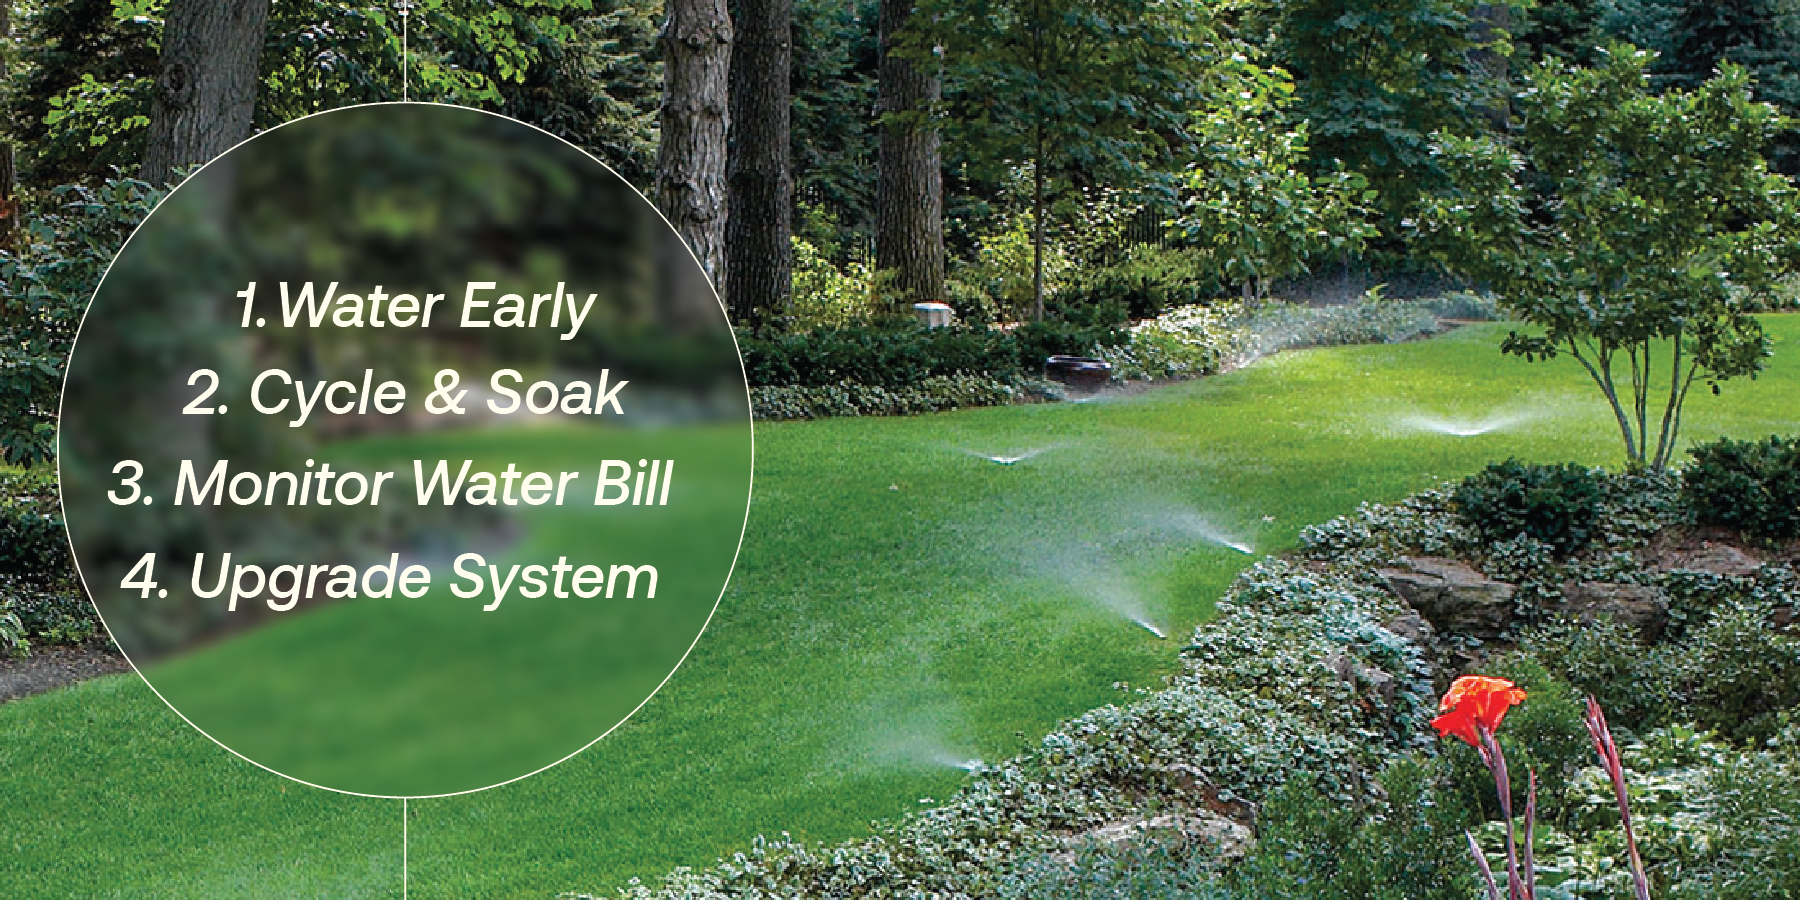 Green lawn with sprinklers running and text listing 1. Water Early, 2. Cycle & Soak, 3. Monitor Water Bill, 4. Upgrade System